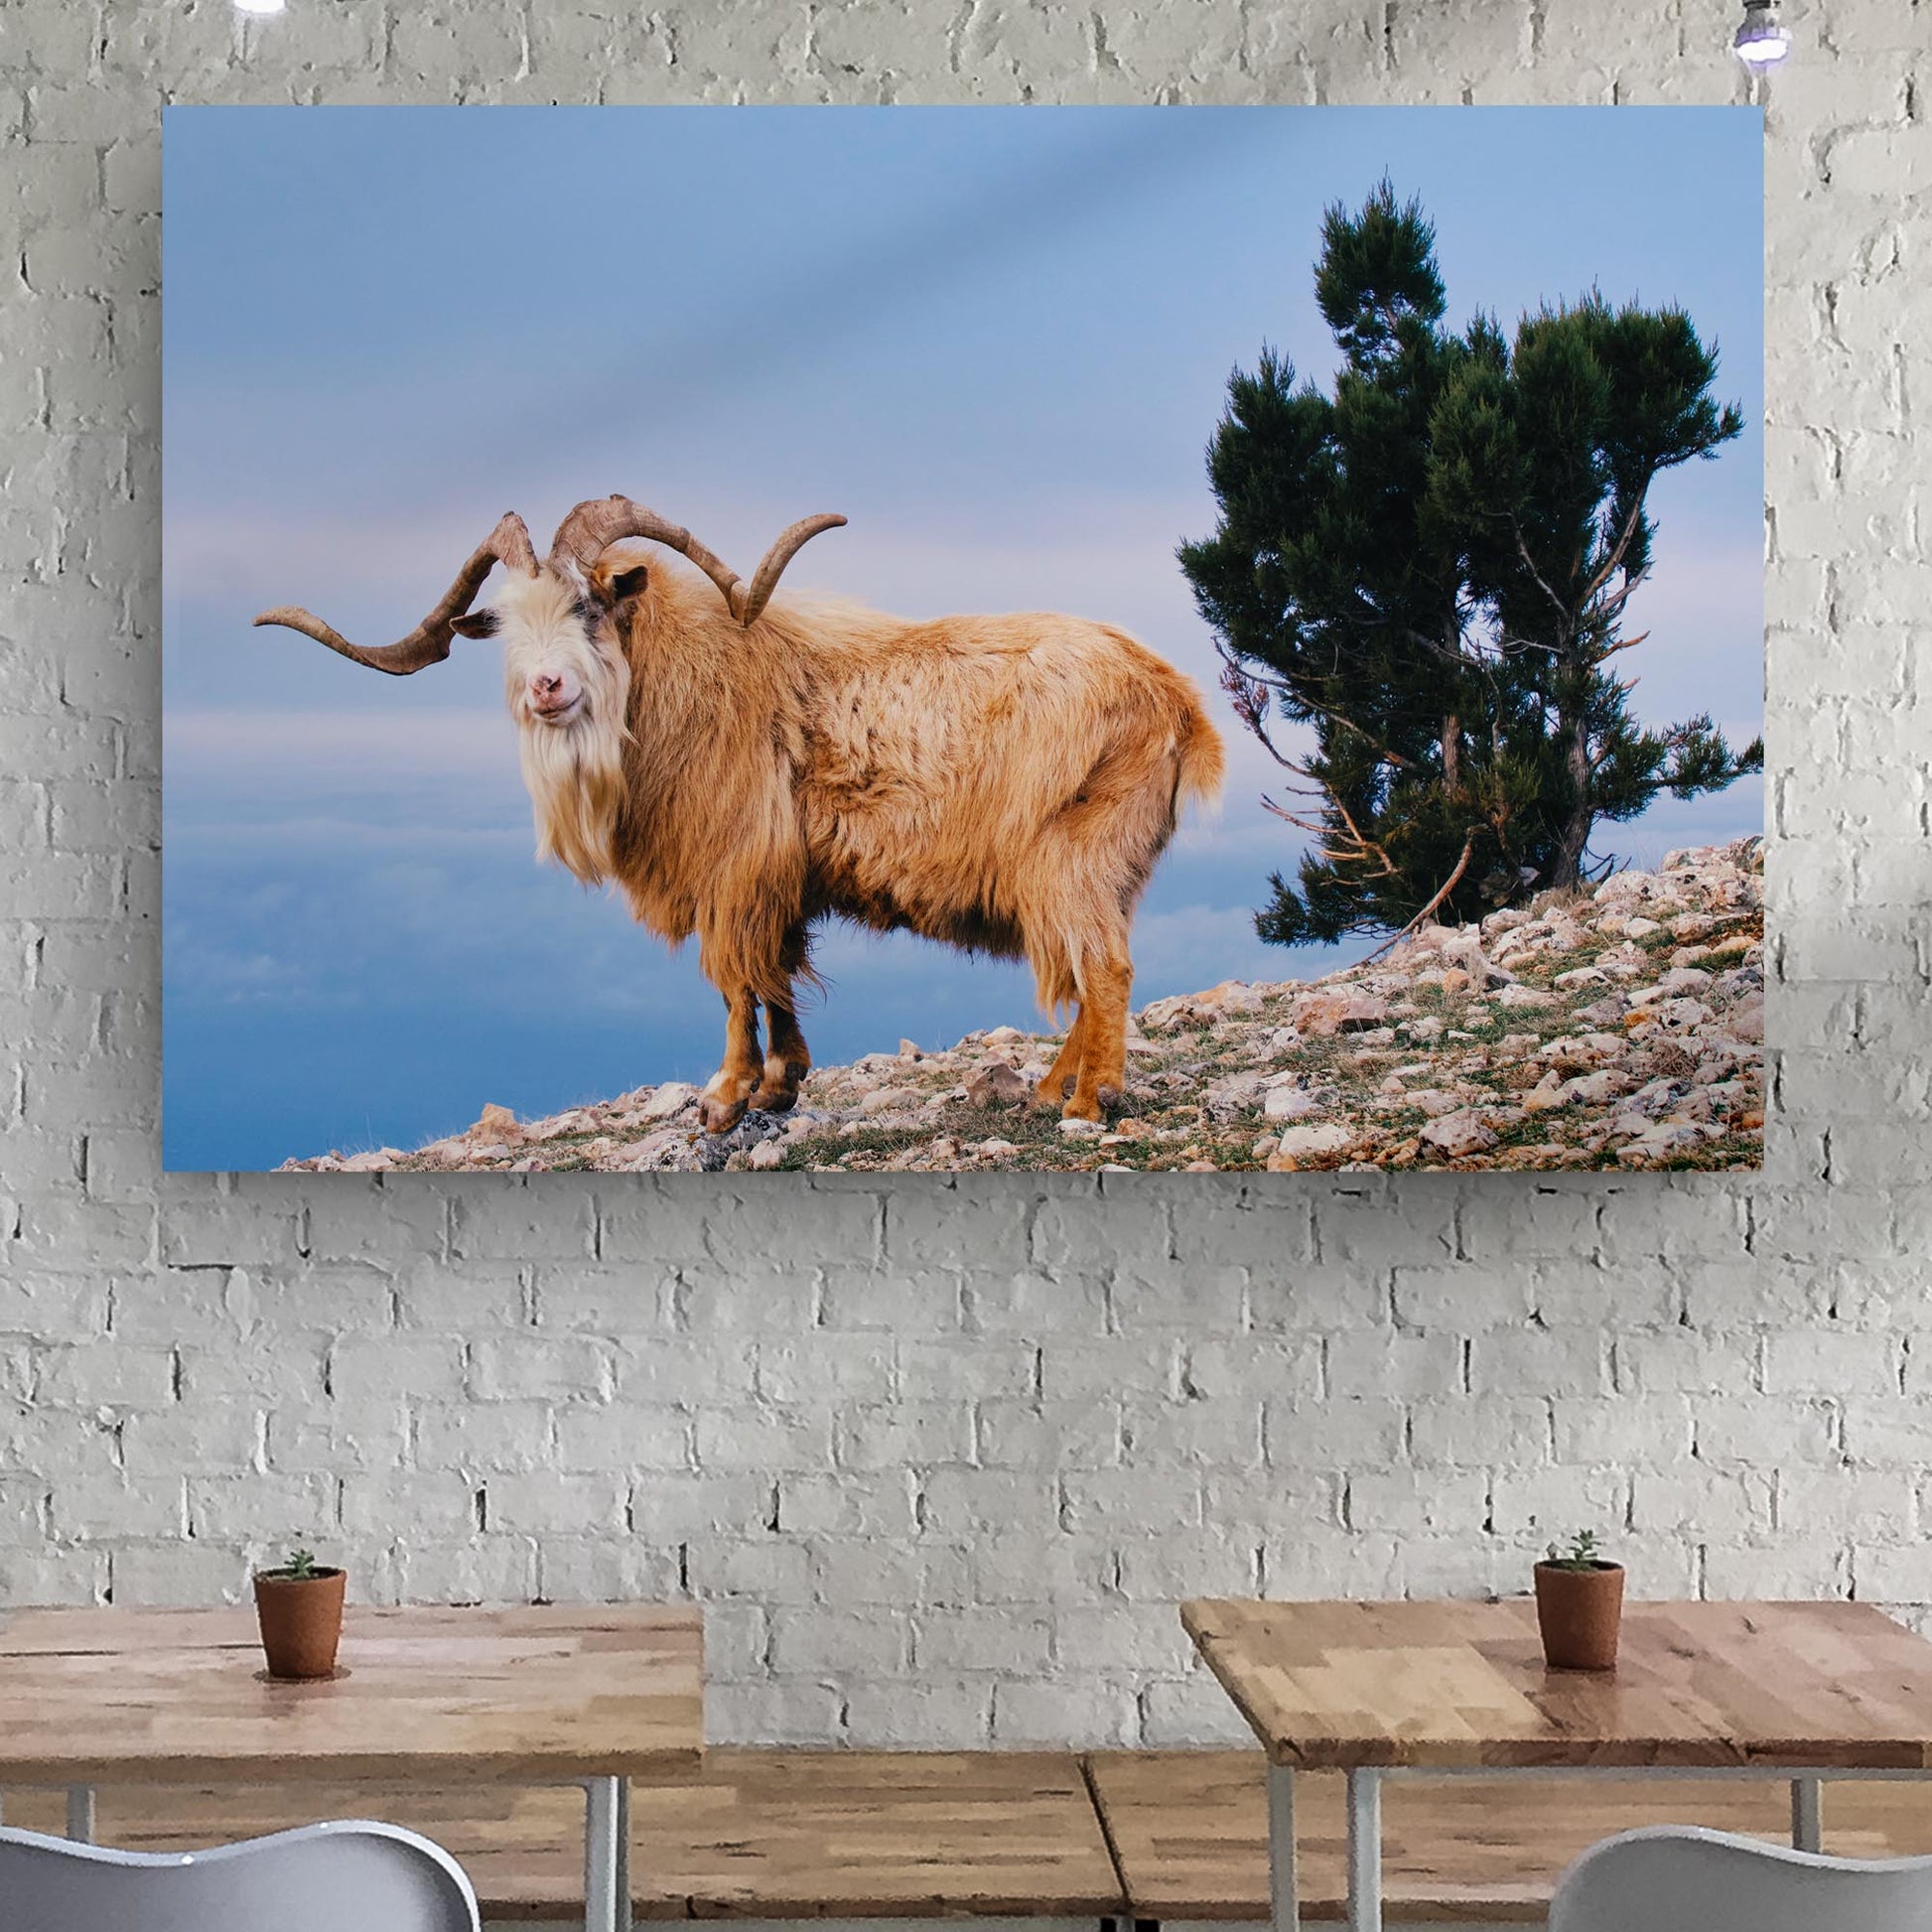 Wild Mountain Goat Canvas Wall Art - Image by Tailored Canvases